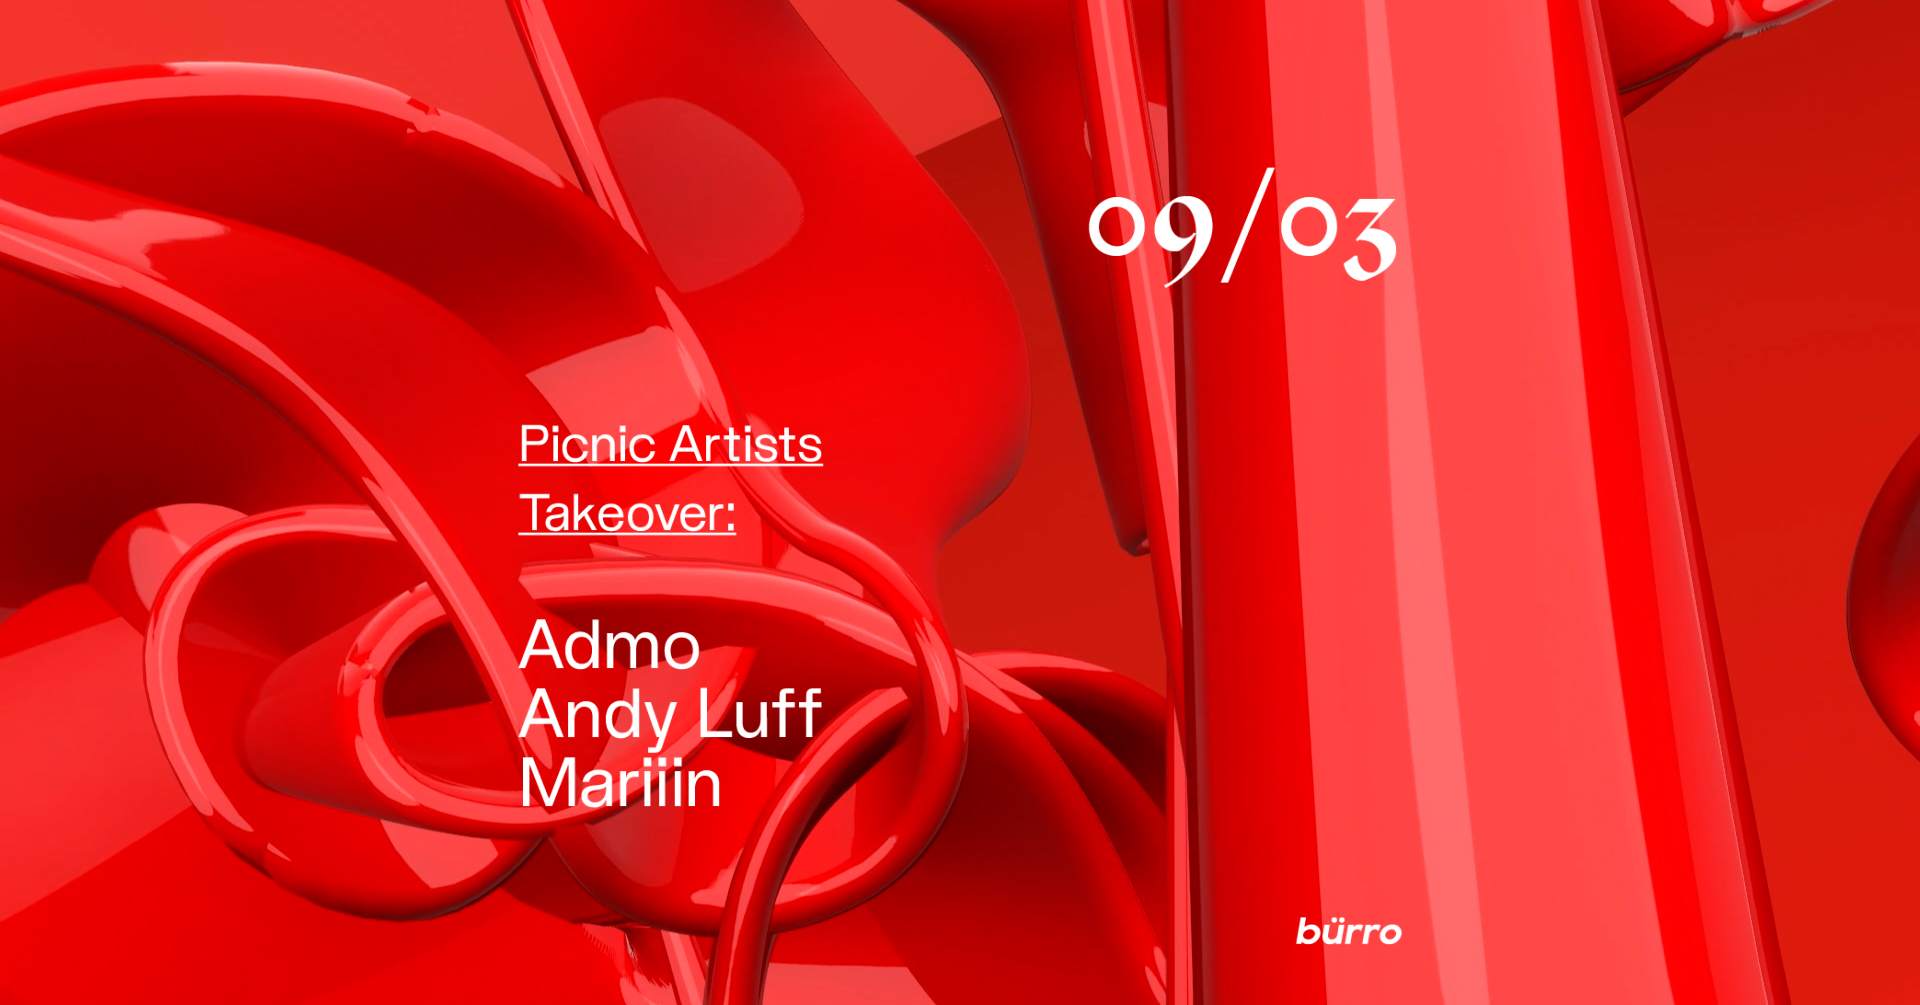 bürro: Picnic Artists Takeover with Admo, Andy Luff, Mariiin - フライヤー表